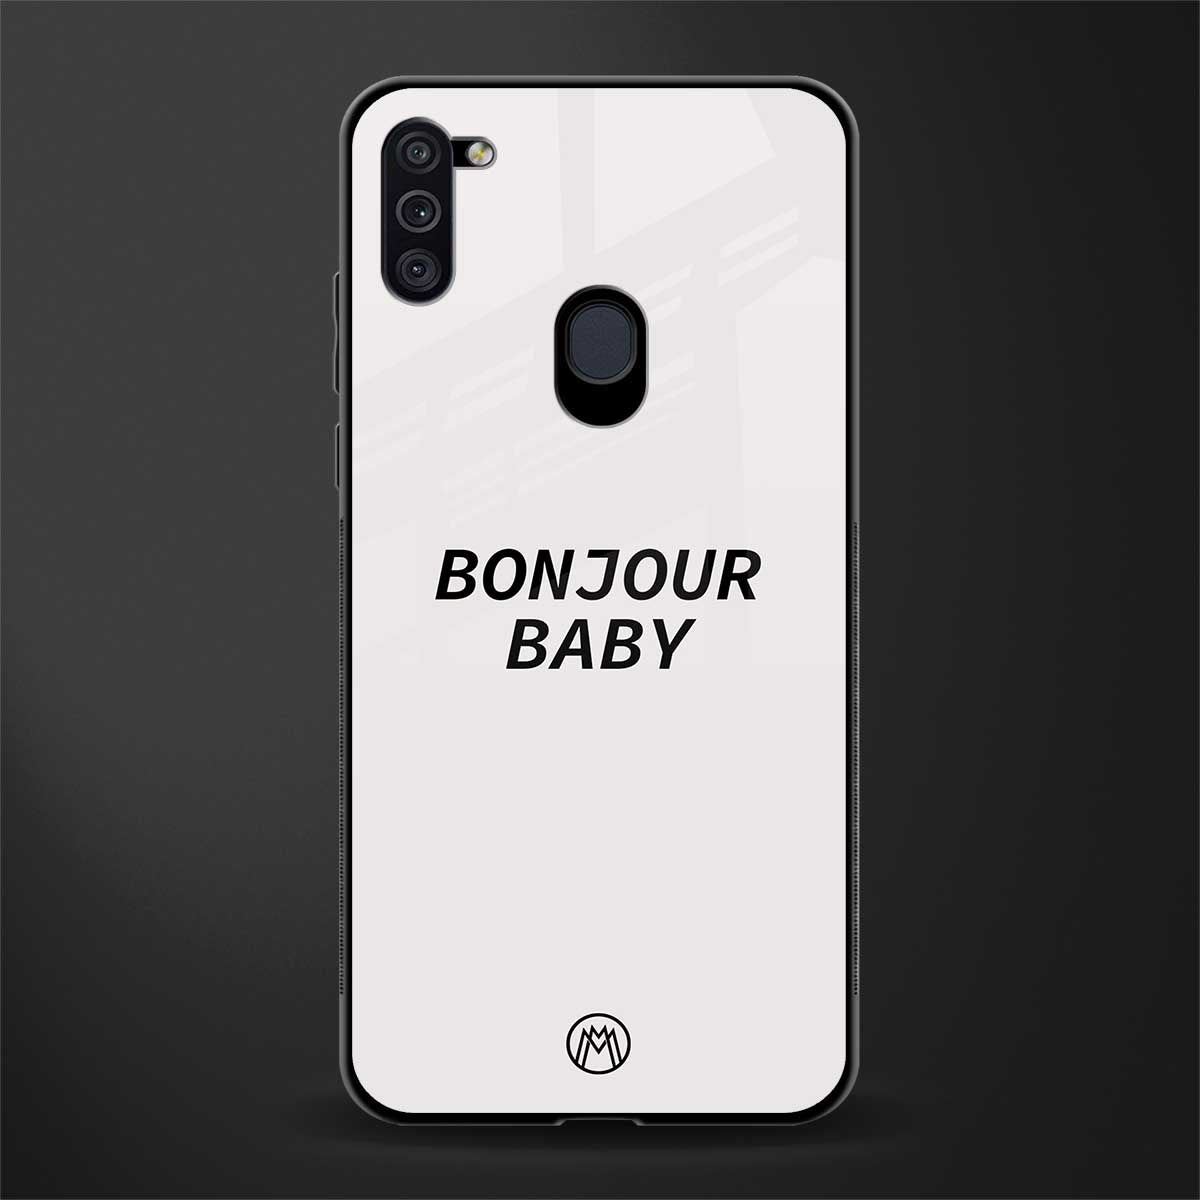 bonjour baby glass case for samsung a11 image